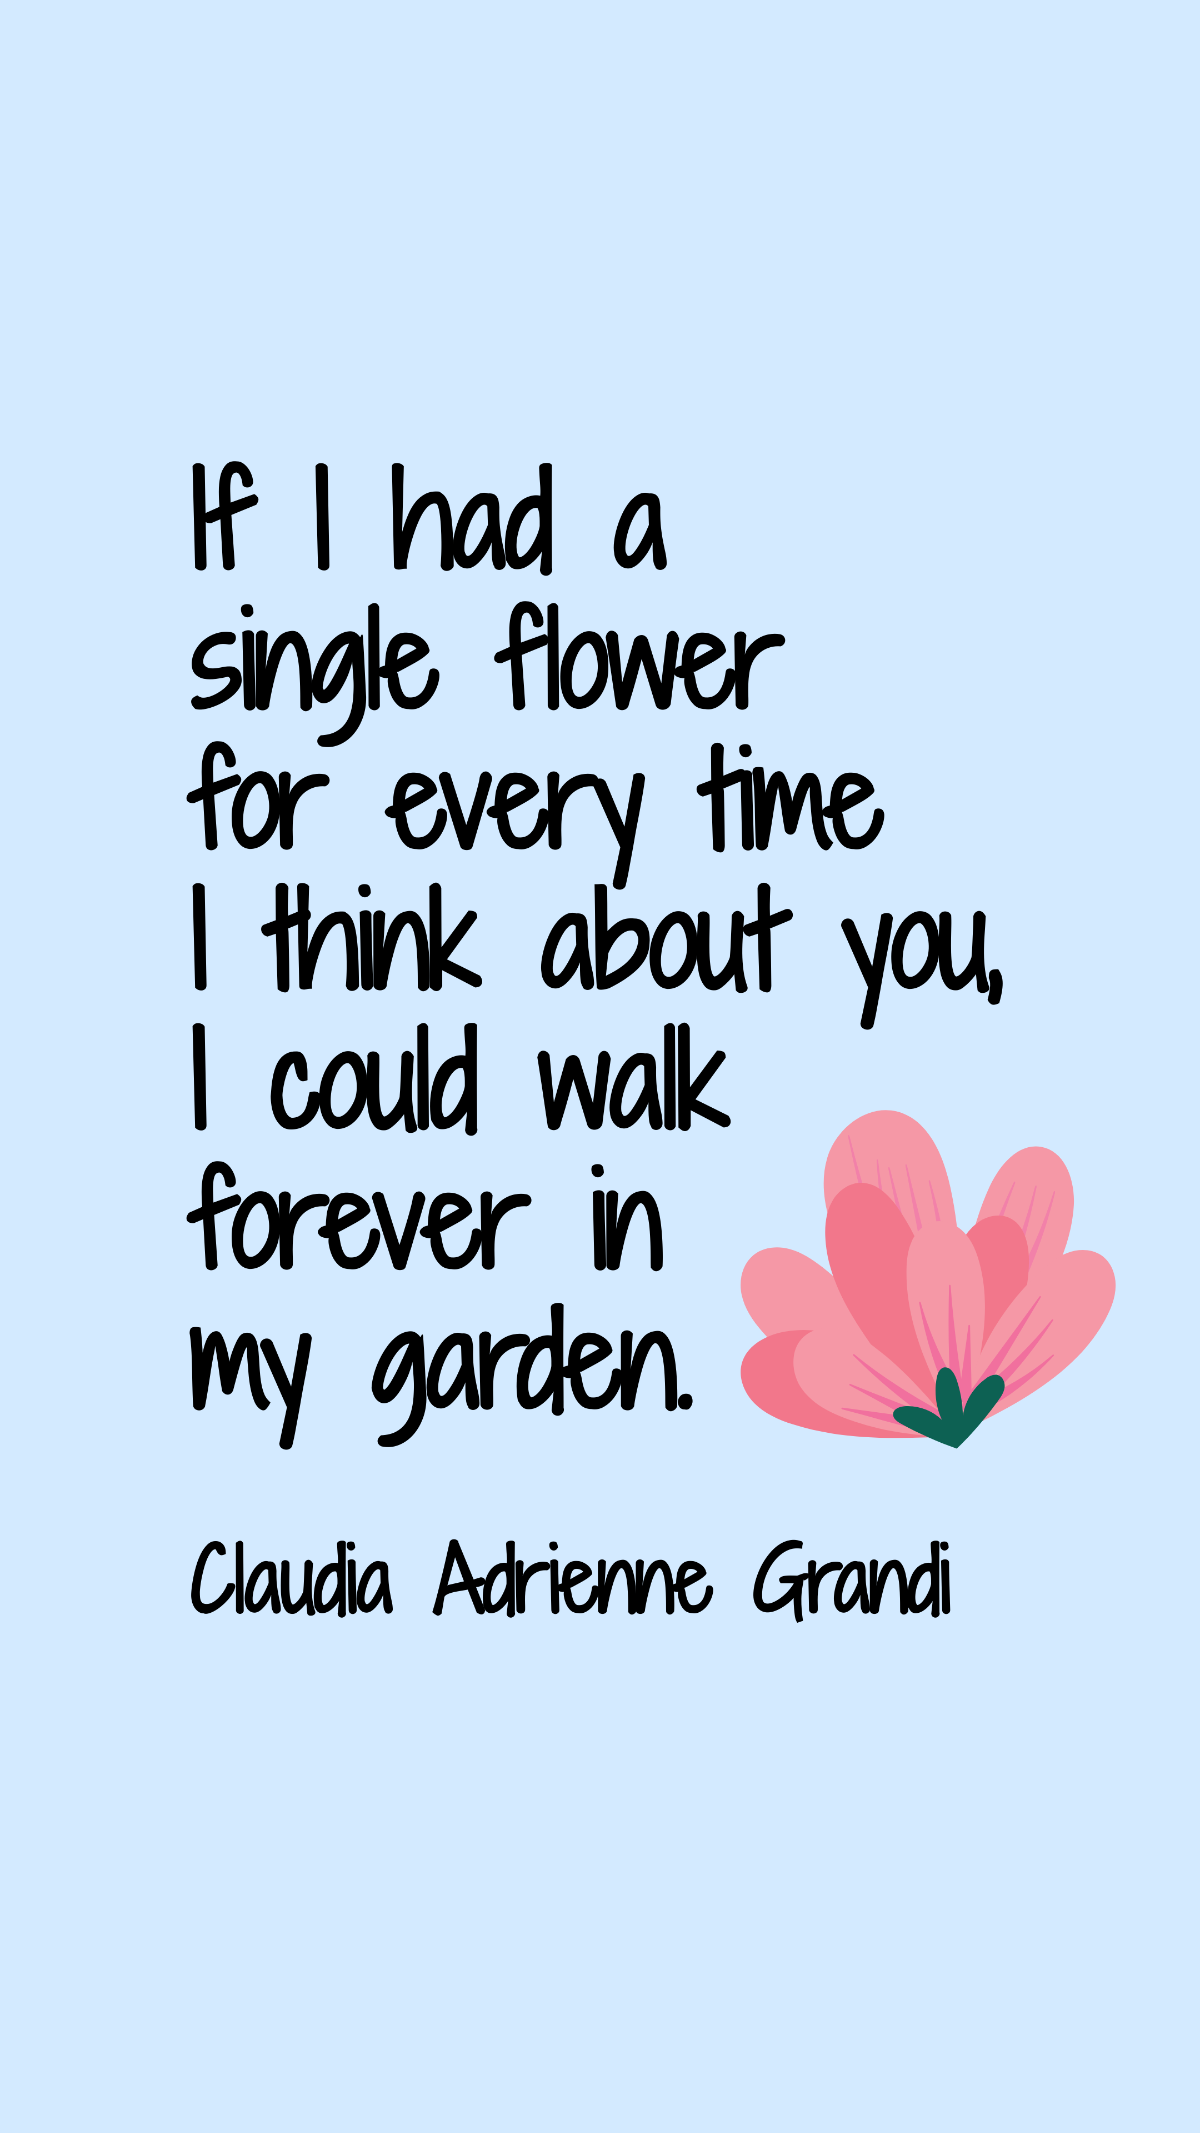 Claudia Adrienne Grandi - If I had a single flower for every time I think about you, I could walk forever in my garden.